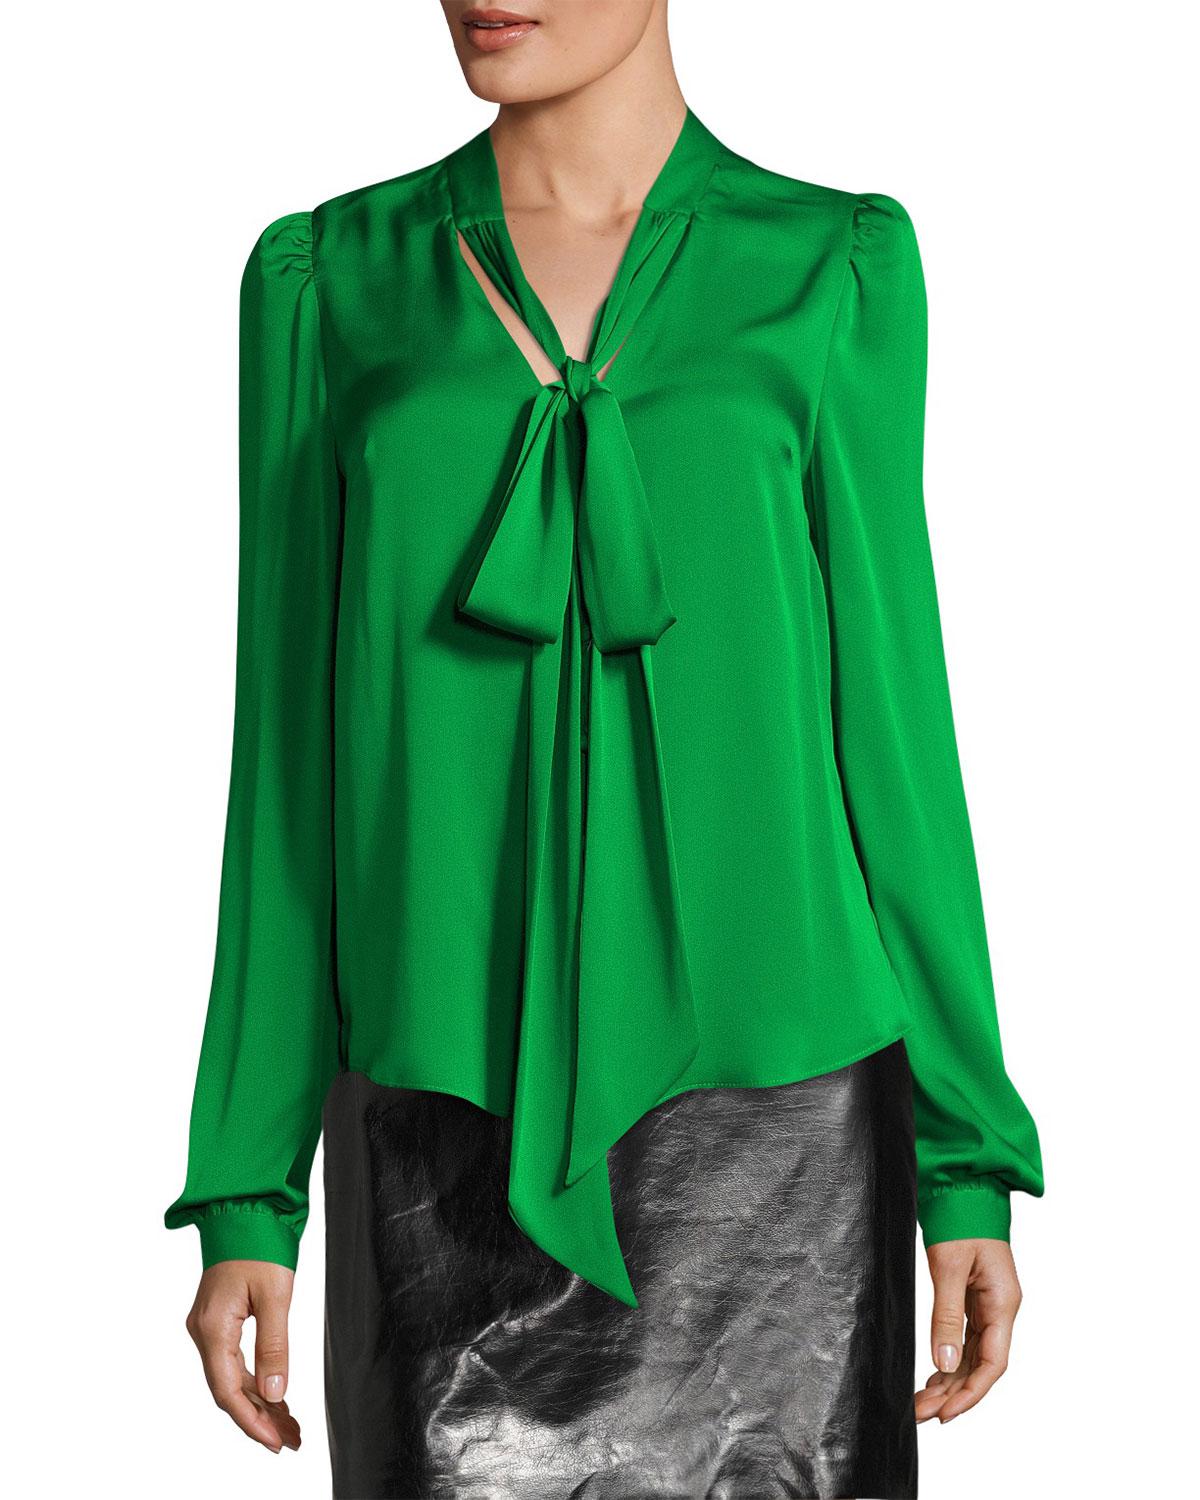 Lyst - Milly Long-sleeve Tie-neck Stretch-silk Blouse in Green